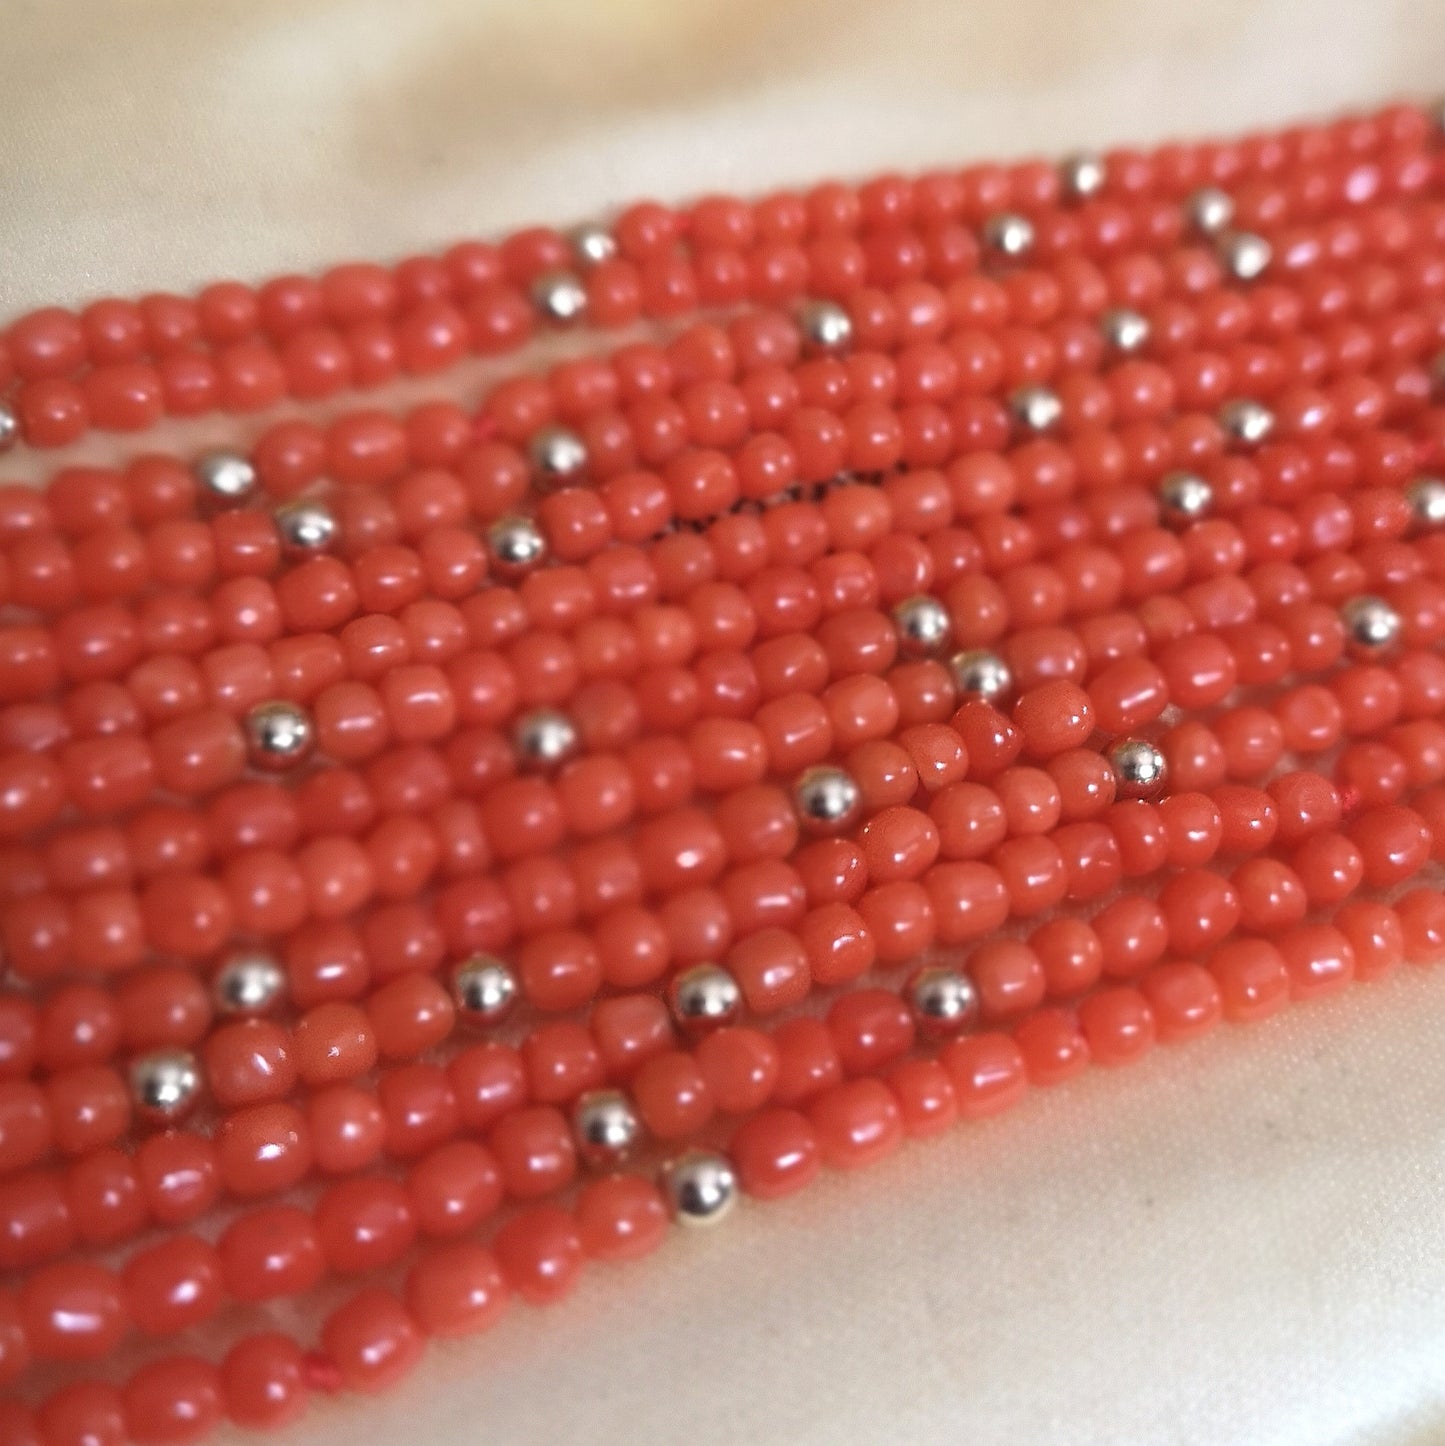 The versatile coral and gold bead 7-strand layering necklace